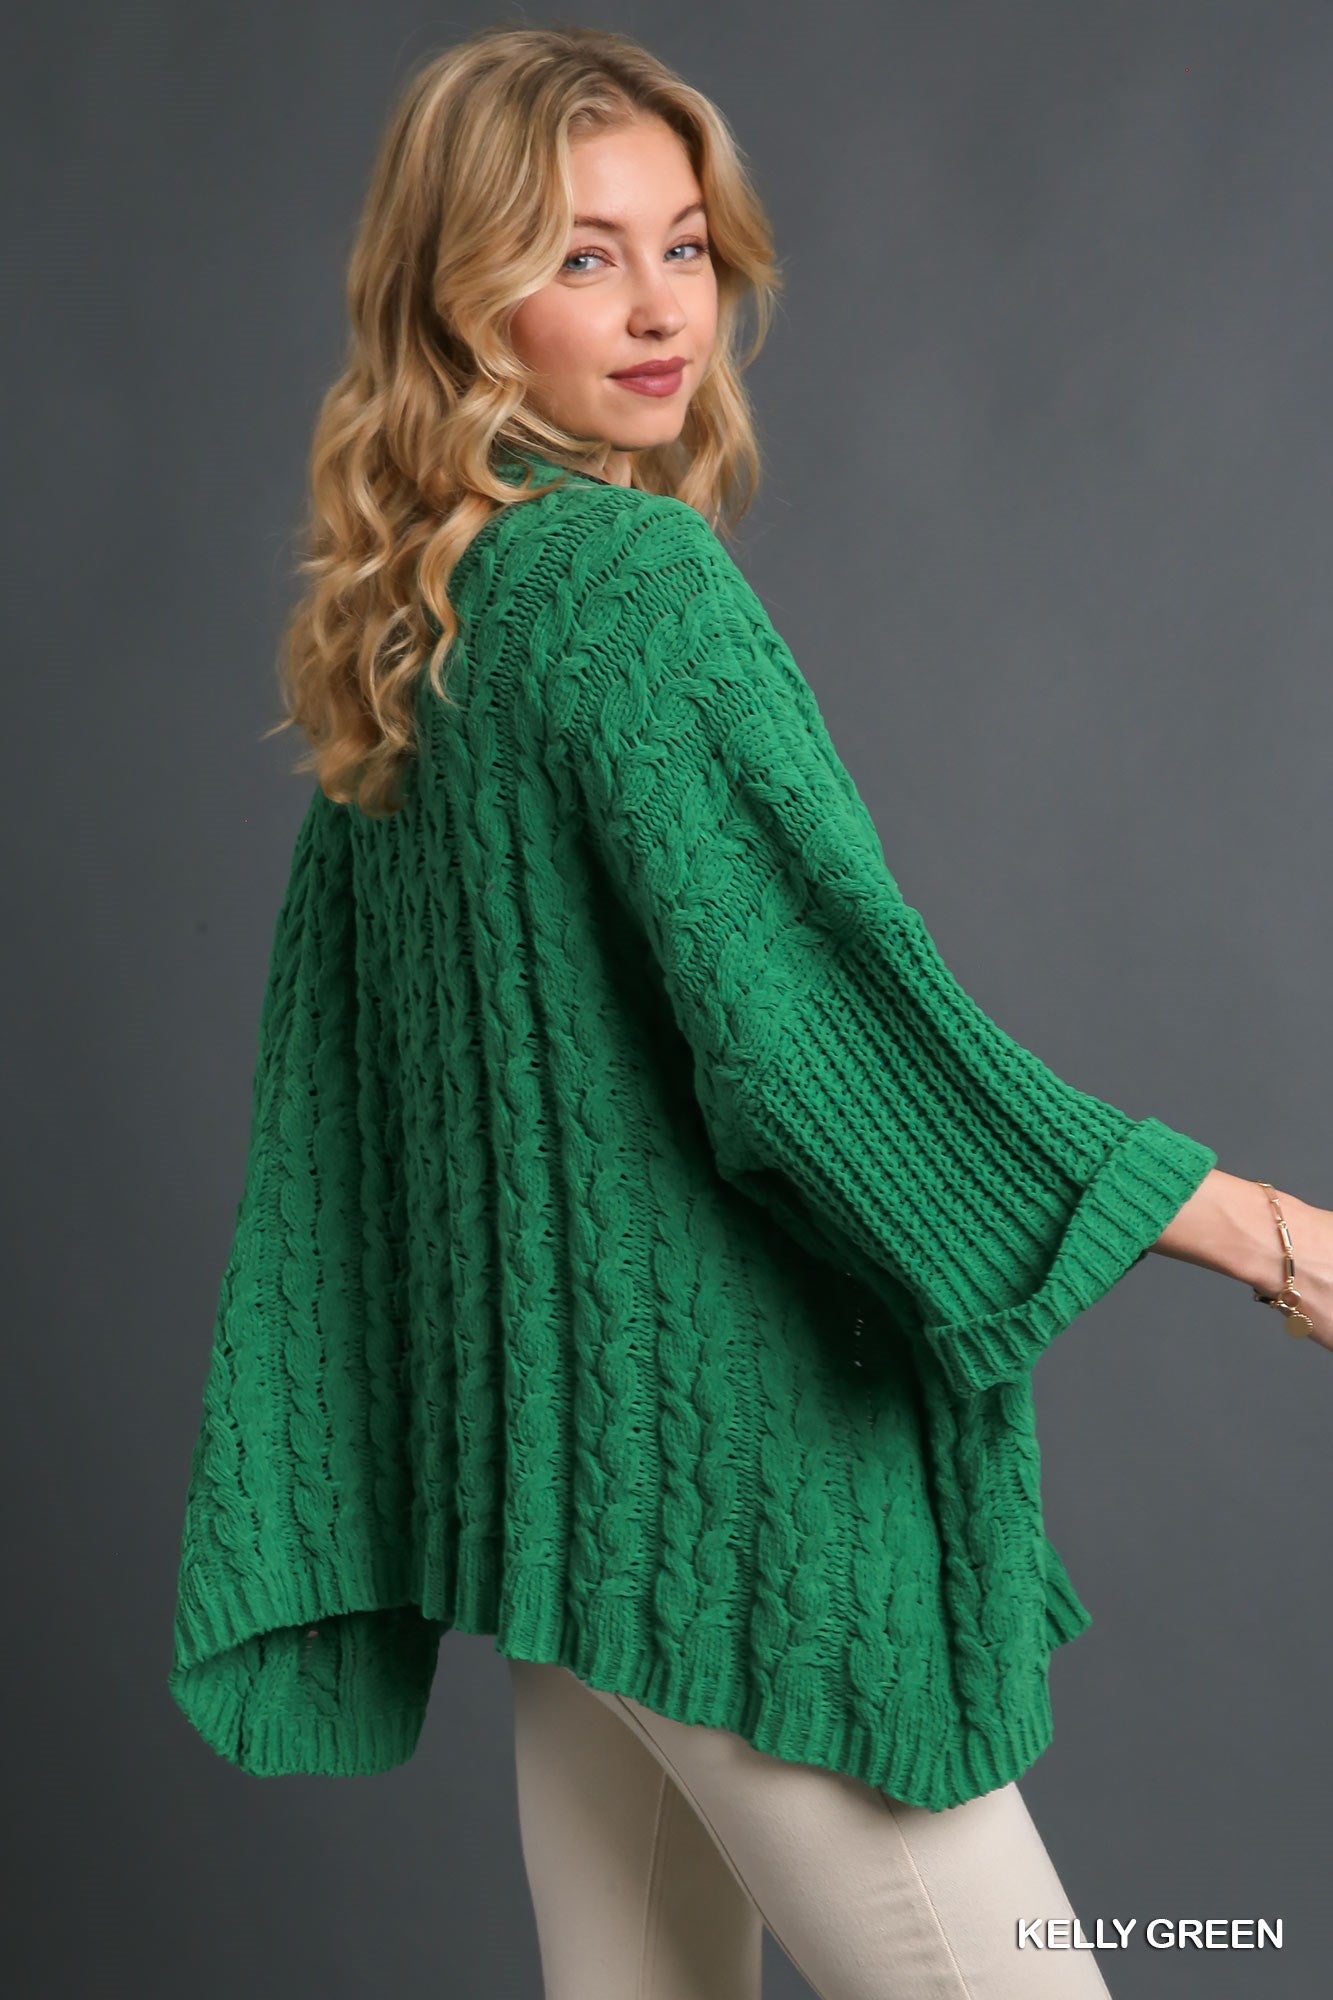 Umgee 3/4 Folded Sleeve Open Front Cable Knit Cardigan Sweater - Roulhac Fashion Boutique